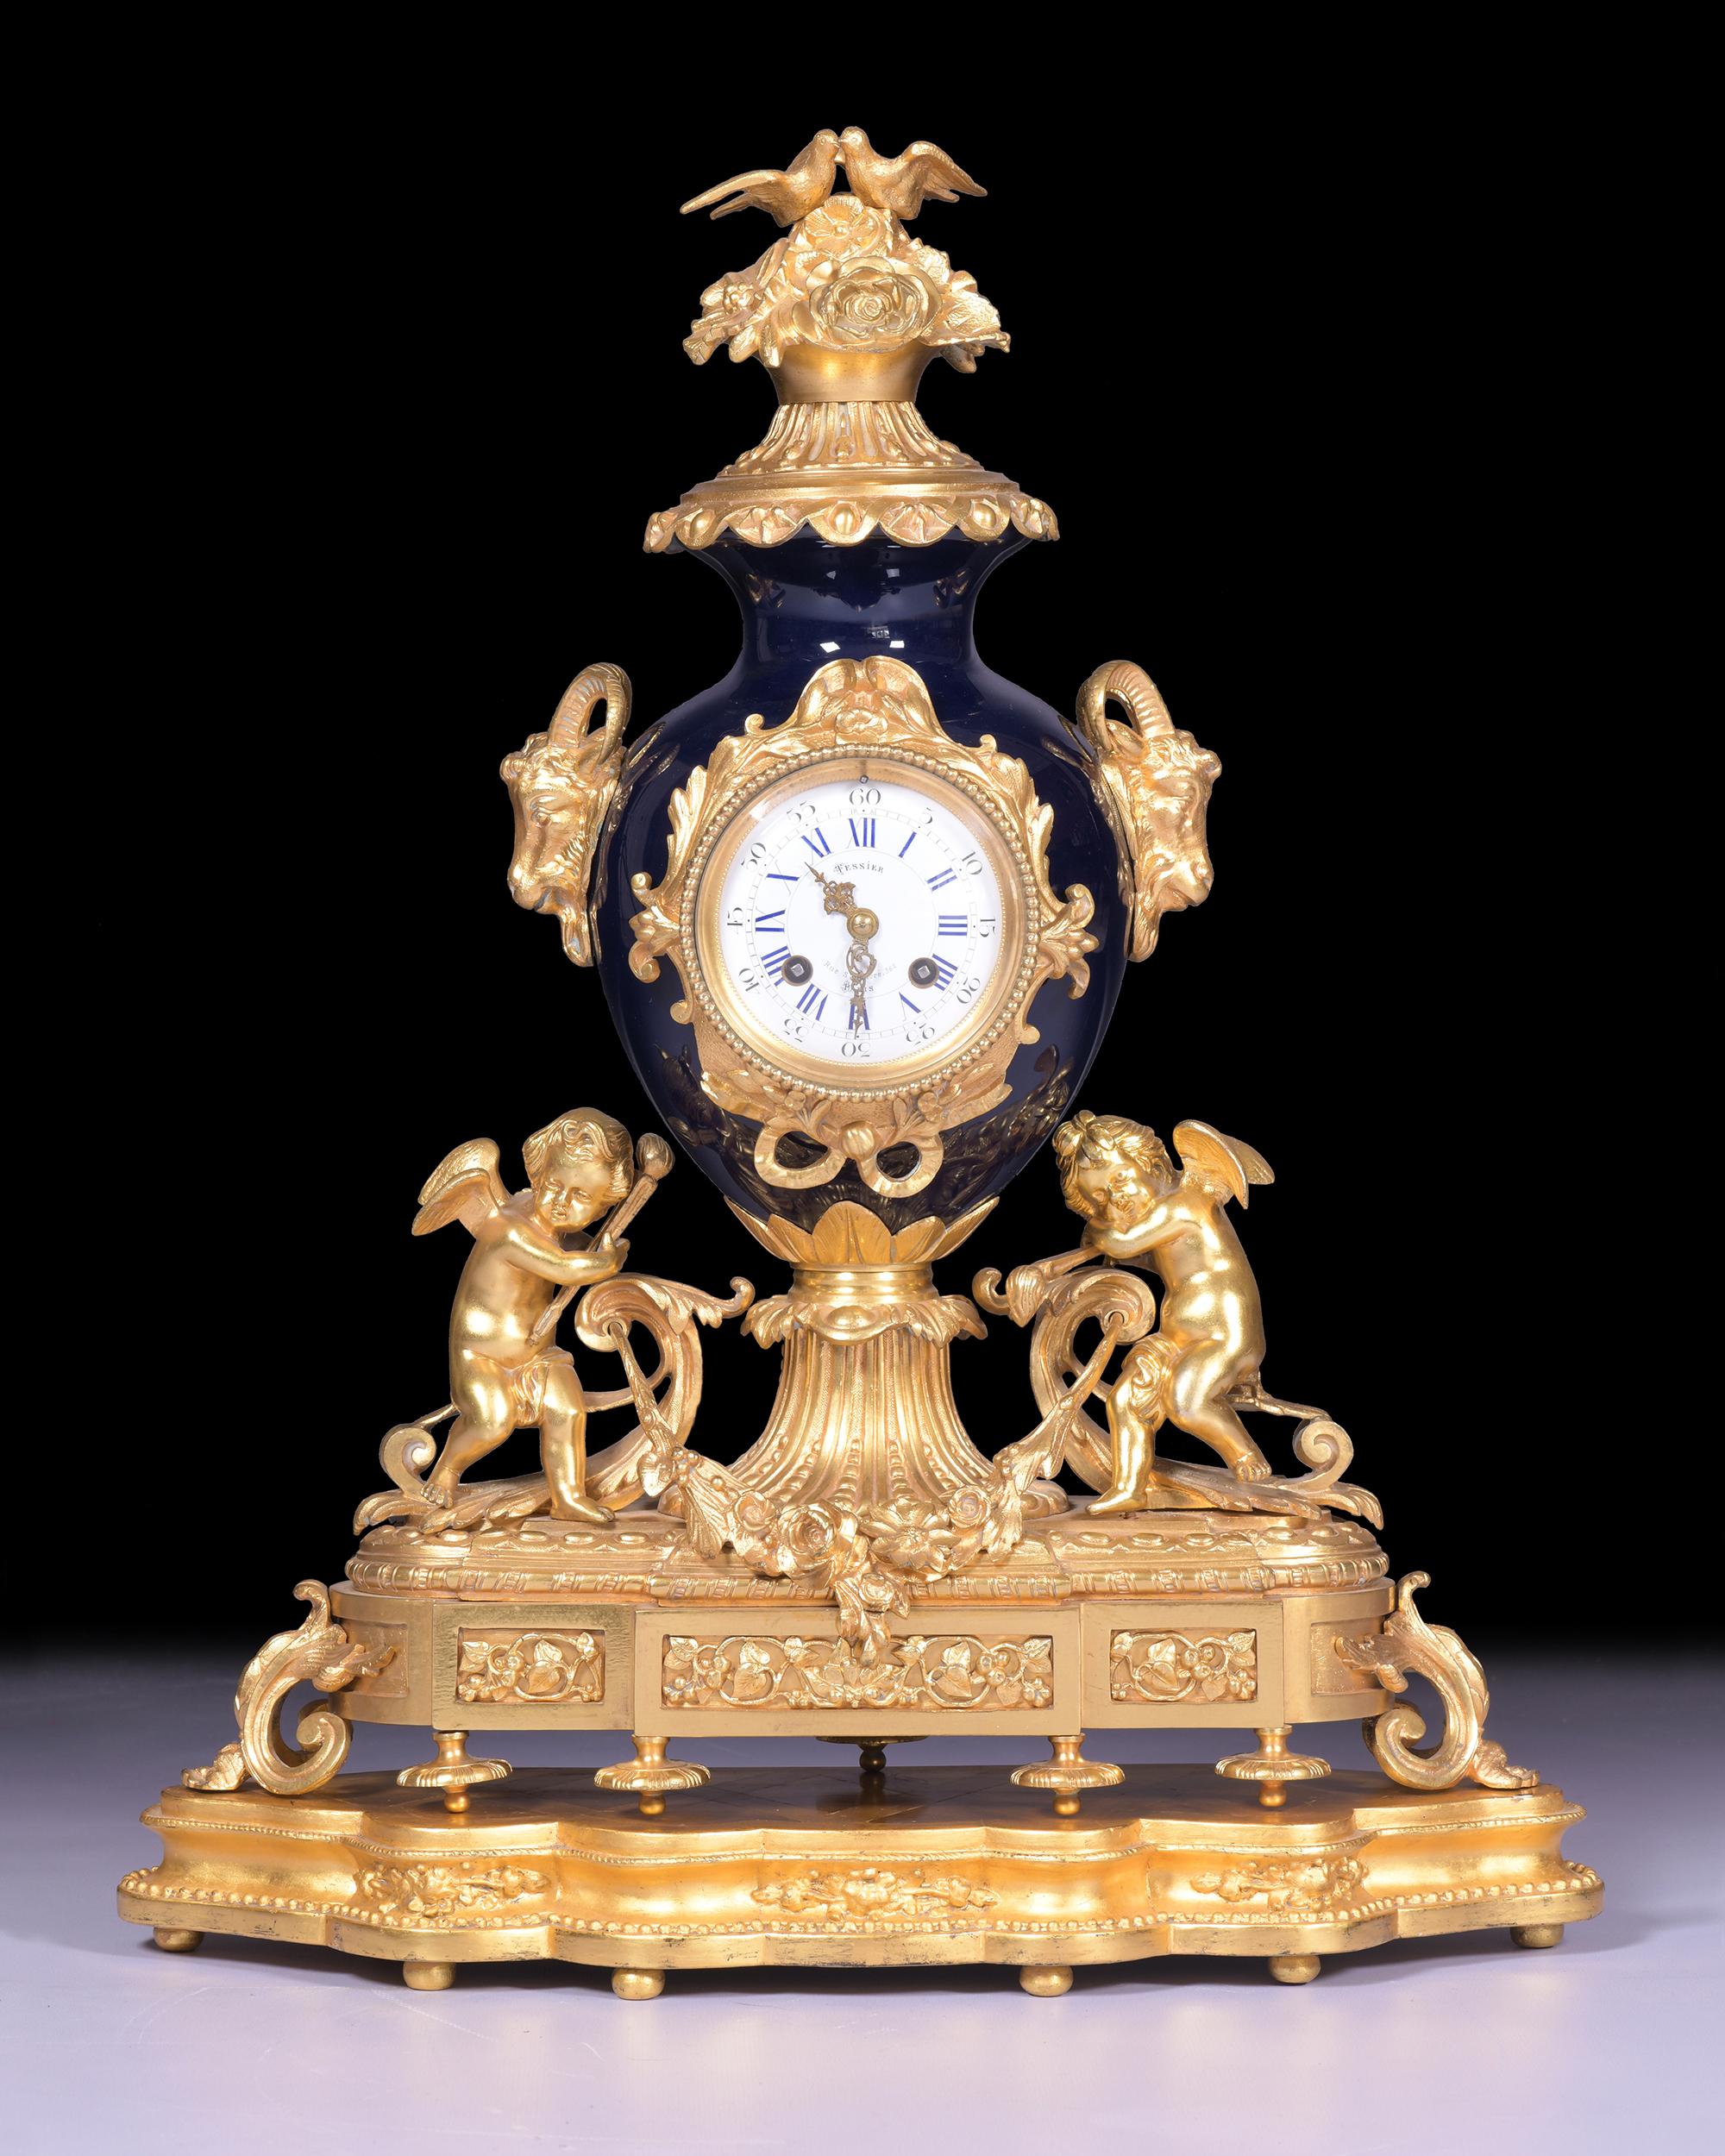 A very fine and most attractive 19th century French Louis XV Rococo Style ormolu and porcelain mantle clock, modelled as an urn with floral finial and goat head masks to the sides, on a plinth base with a pair of figures, the white enamelled dial